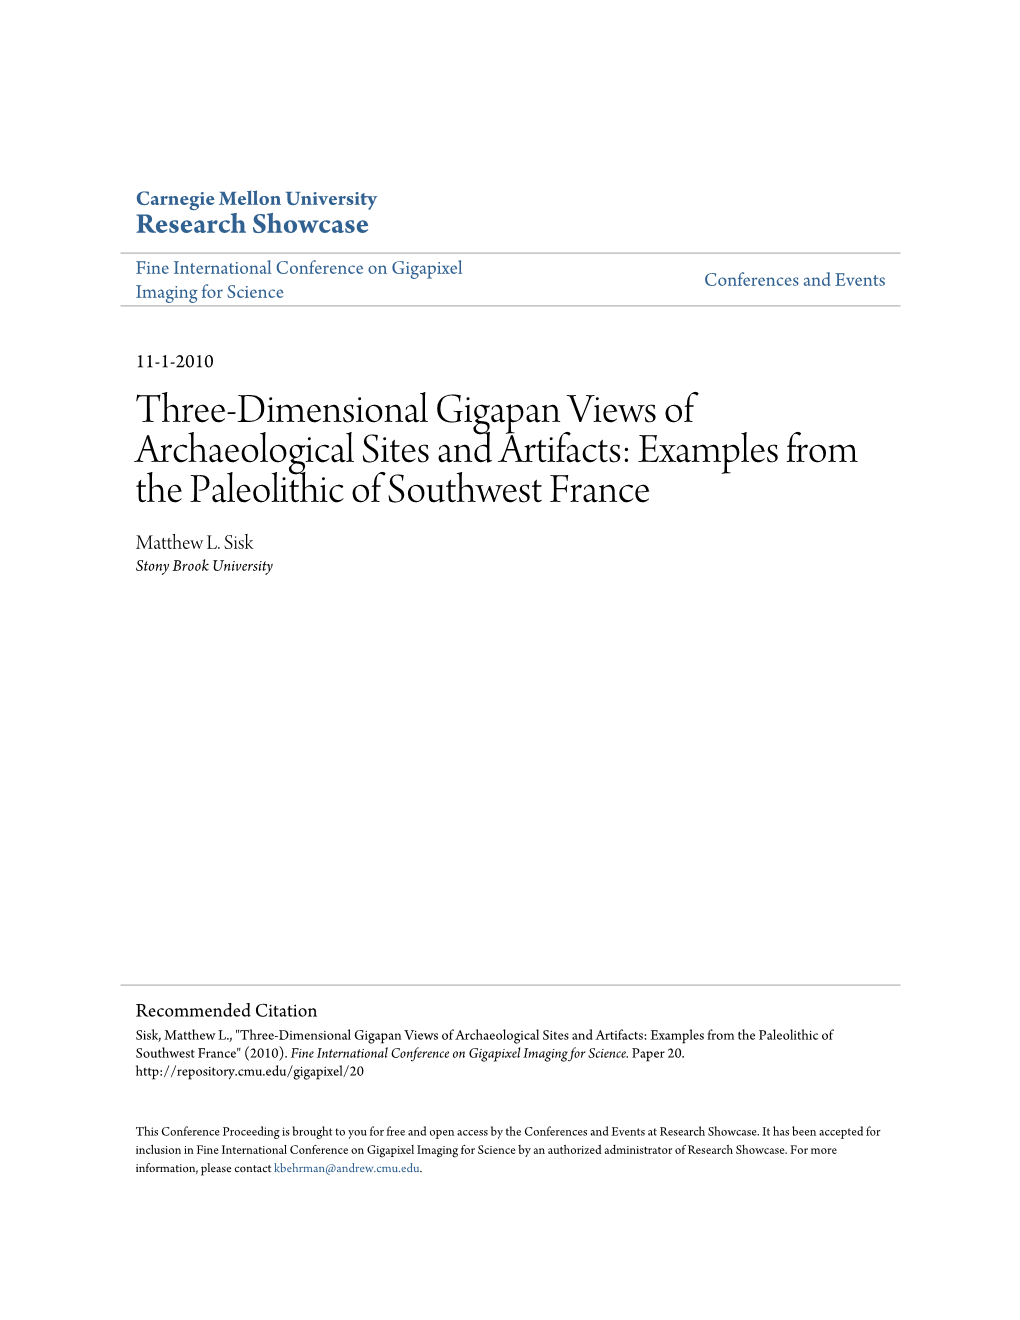 Three-Dimensional Gigapan Views of Archaeological Sites and Artifacts: Examples from the Paleolithic of Southwest France Matthew L